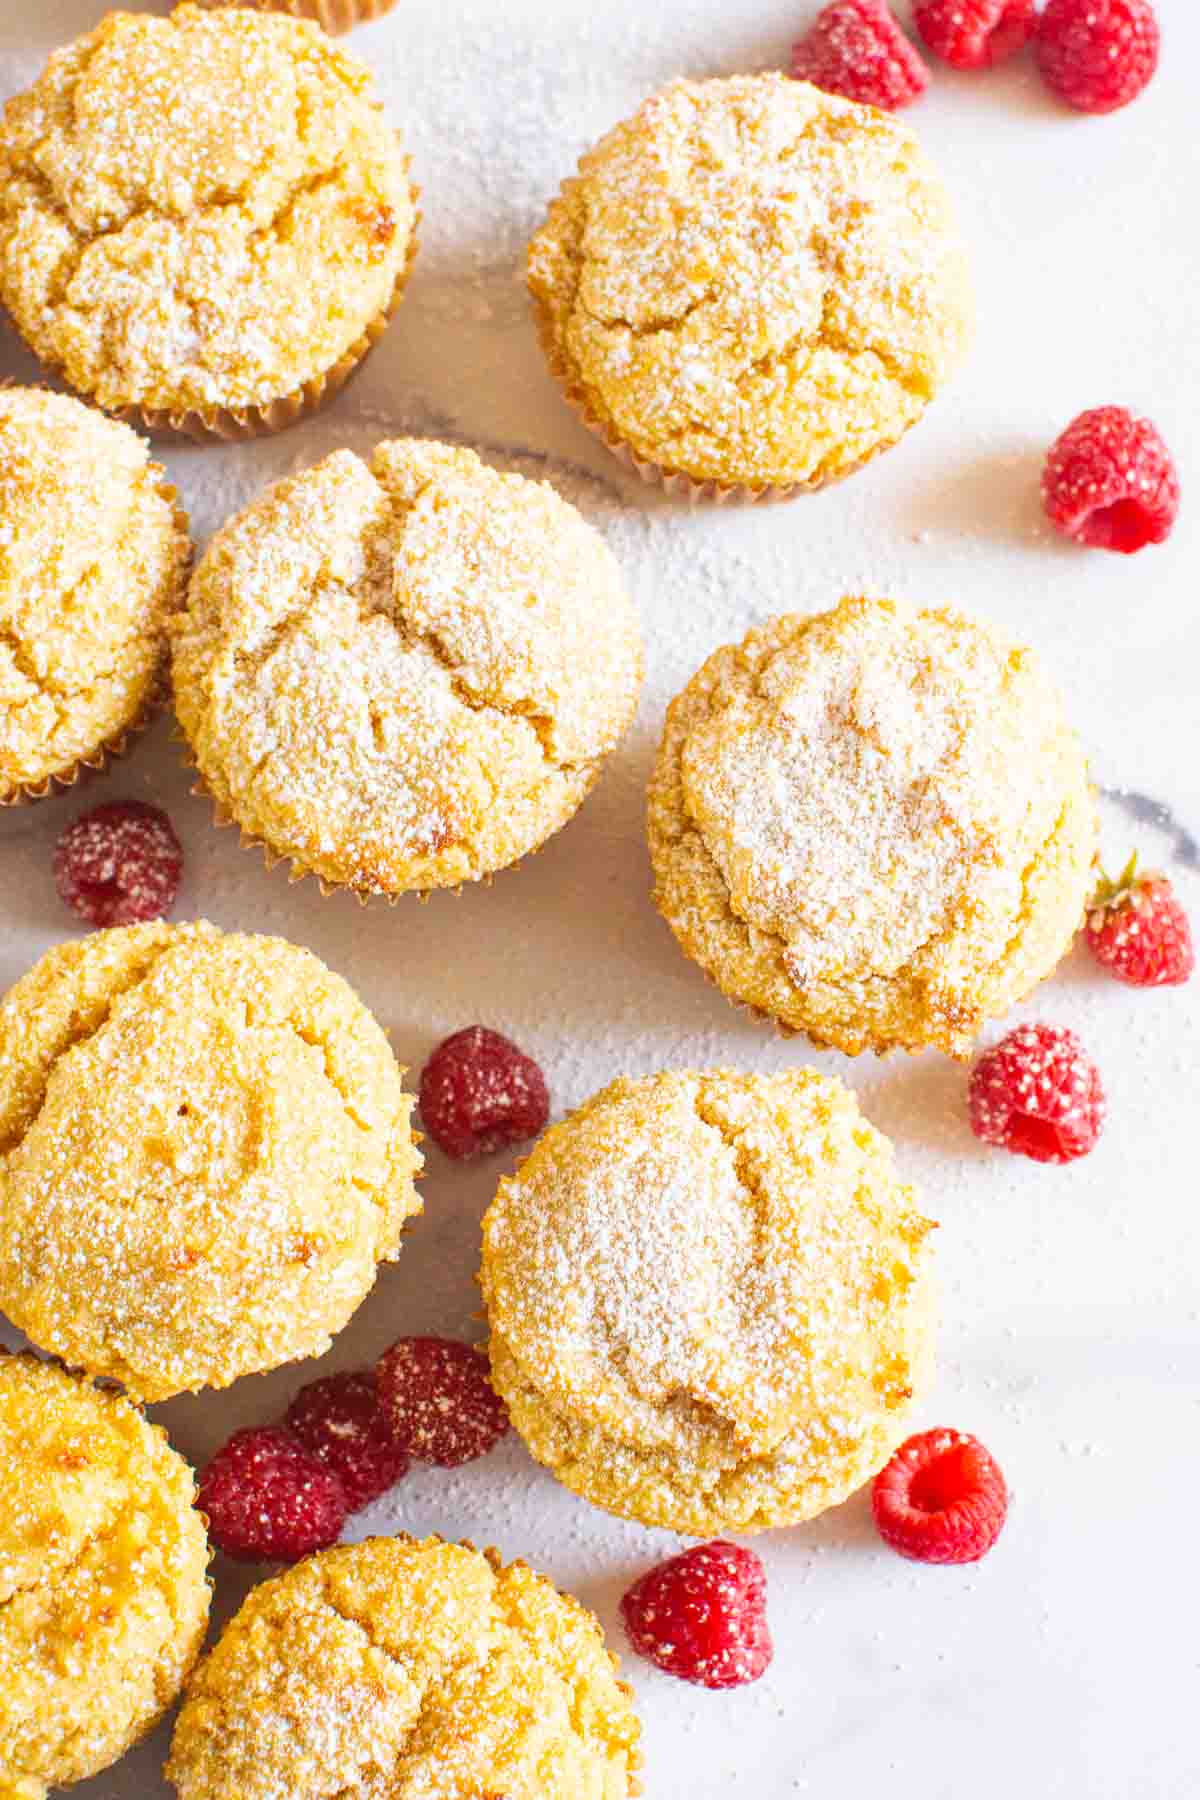 Looking down at almond flour yogurt muffins dusted with icing sugar and raspberries around them.